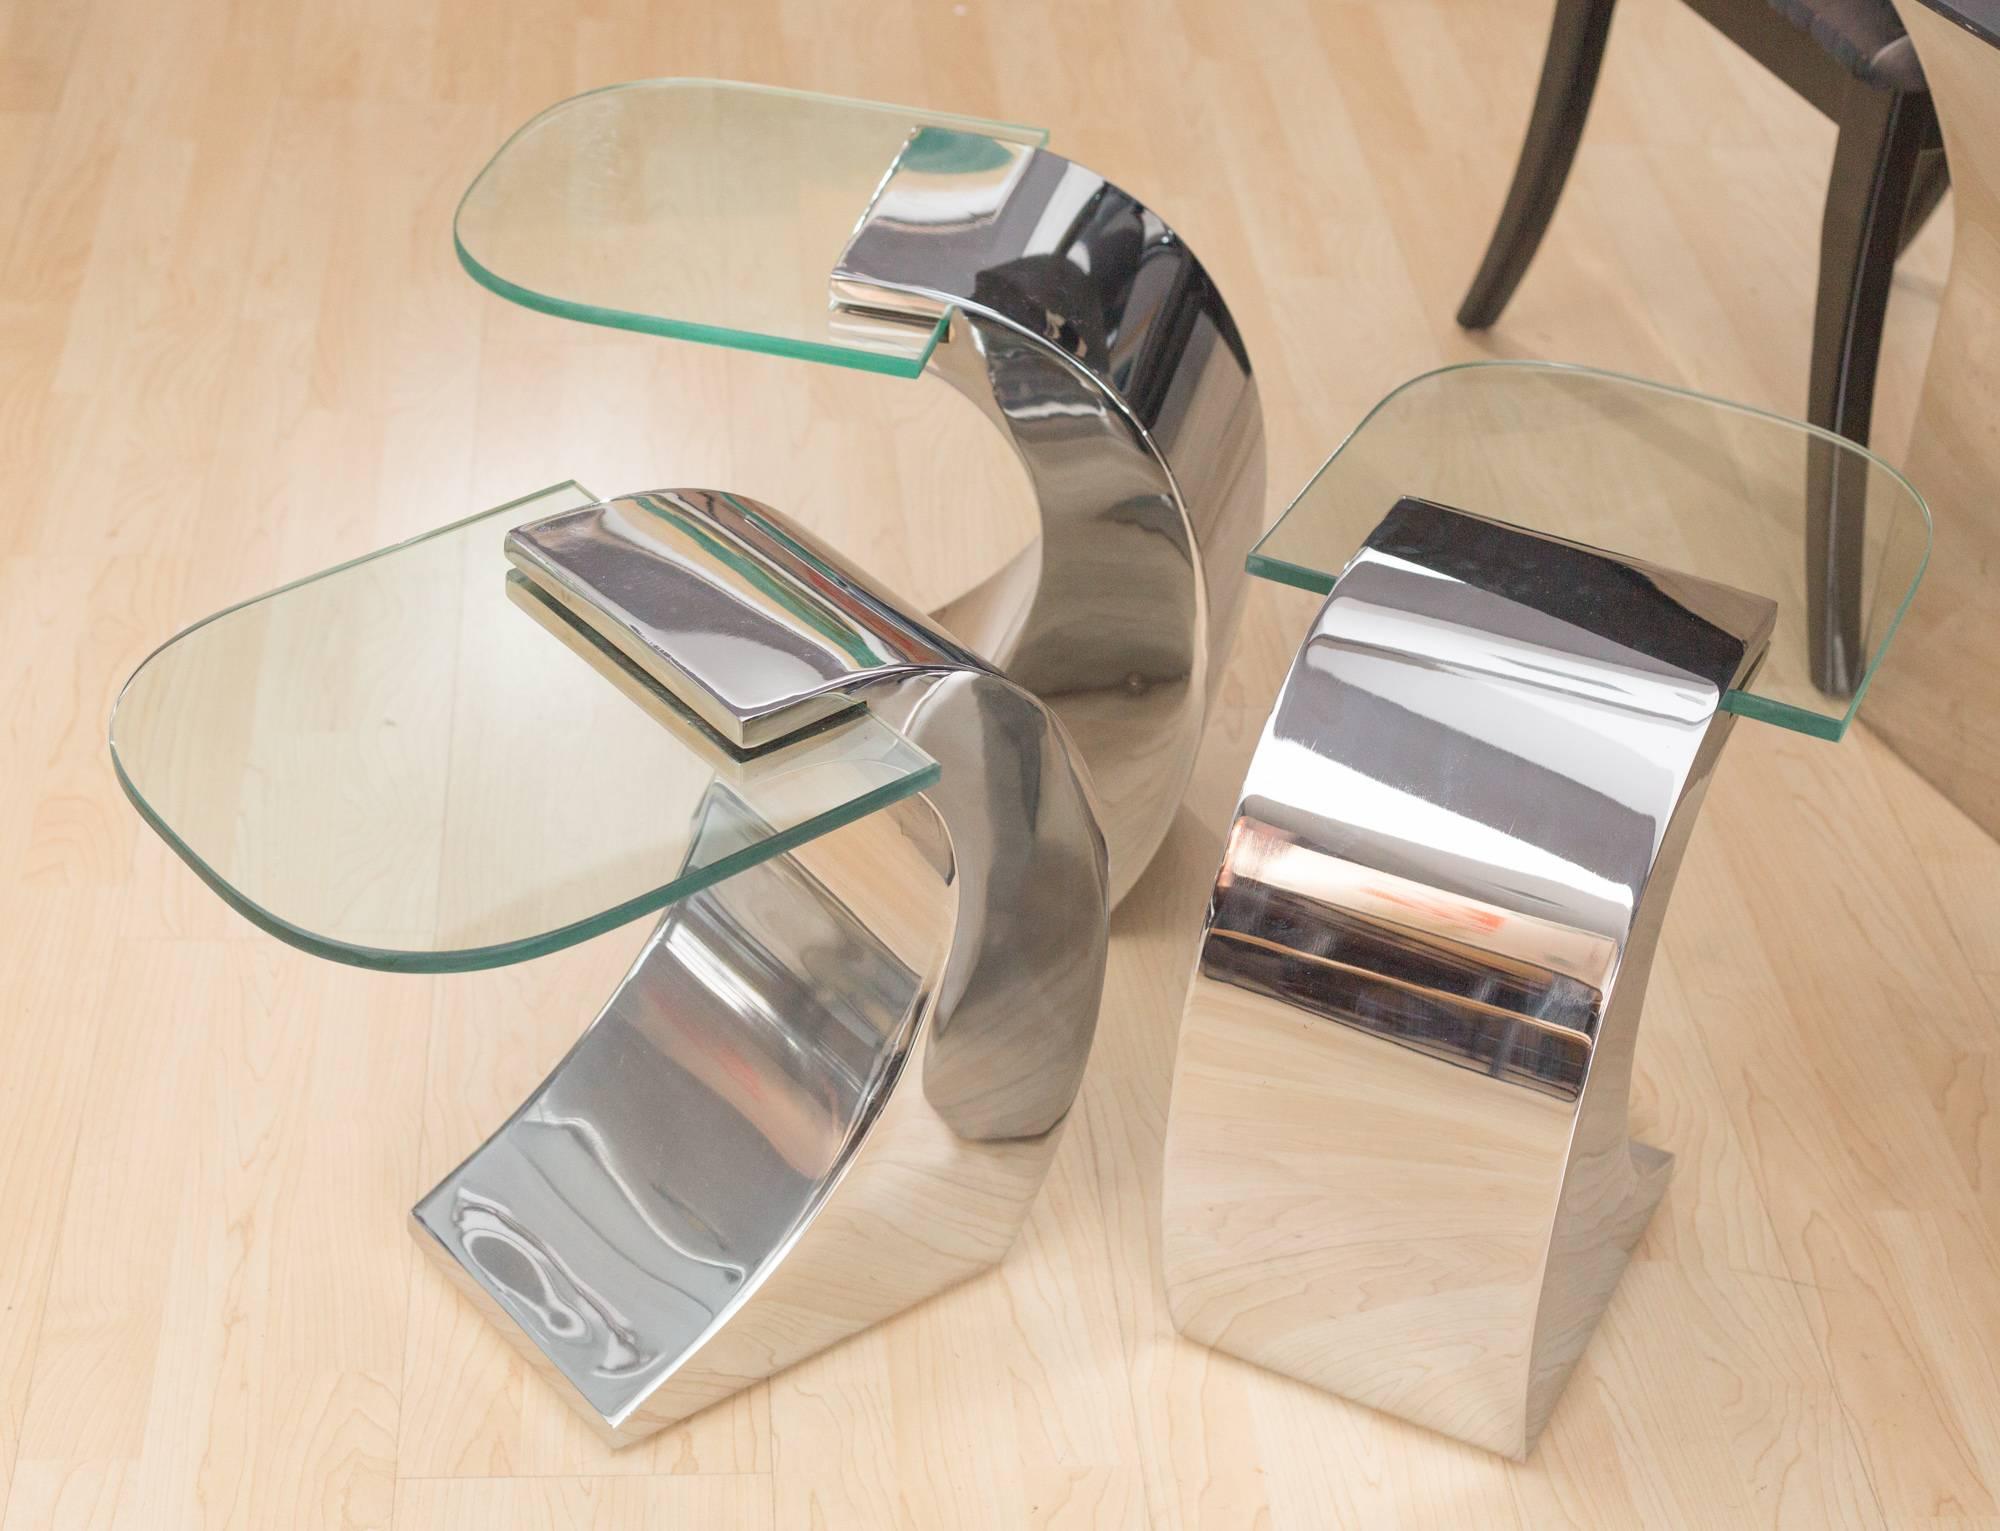 Pierre Cardin set of 3 Side Tables In Excellent Condition For Sale In Miami, FL